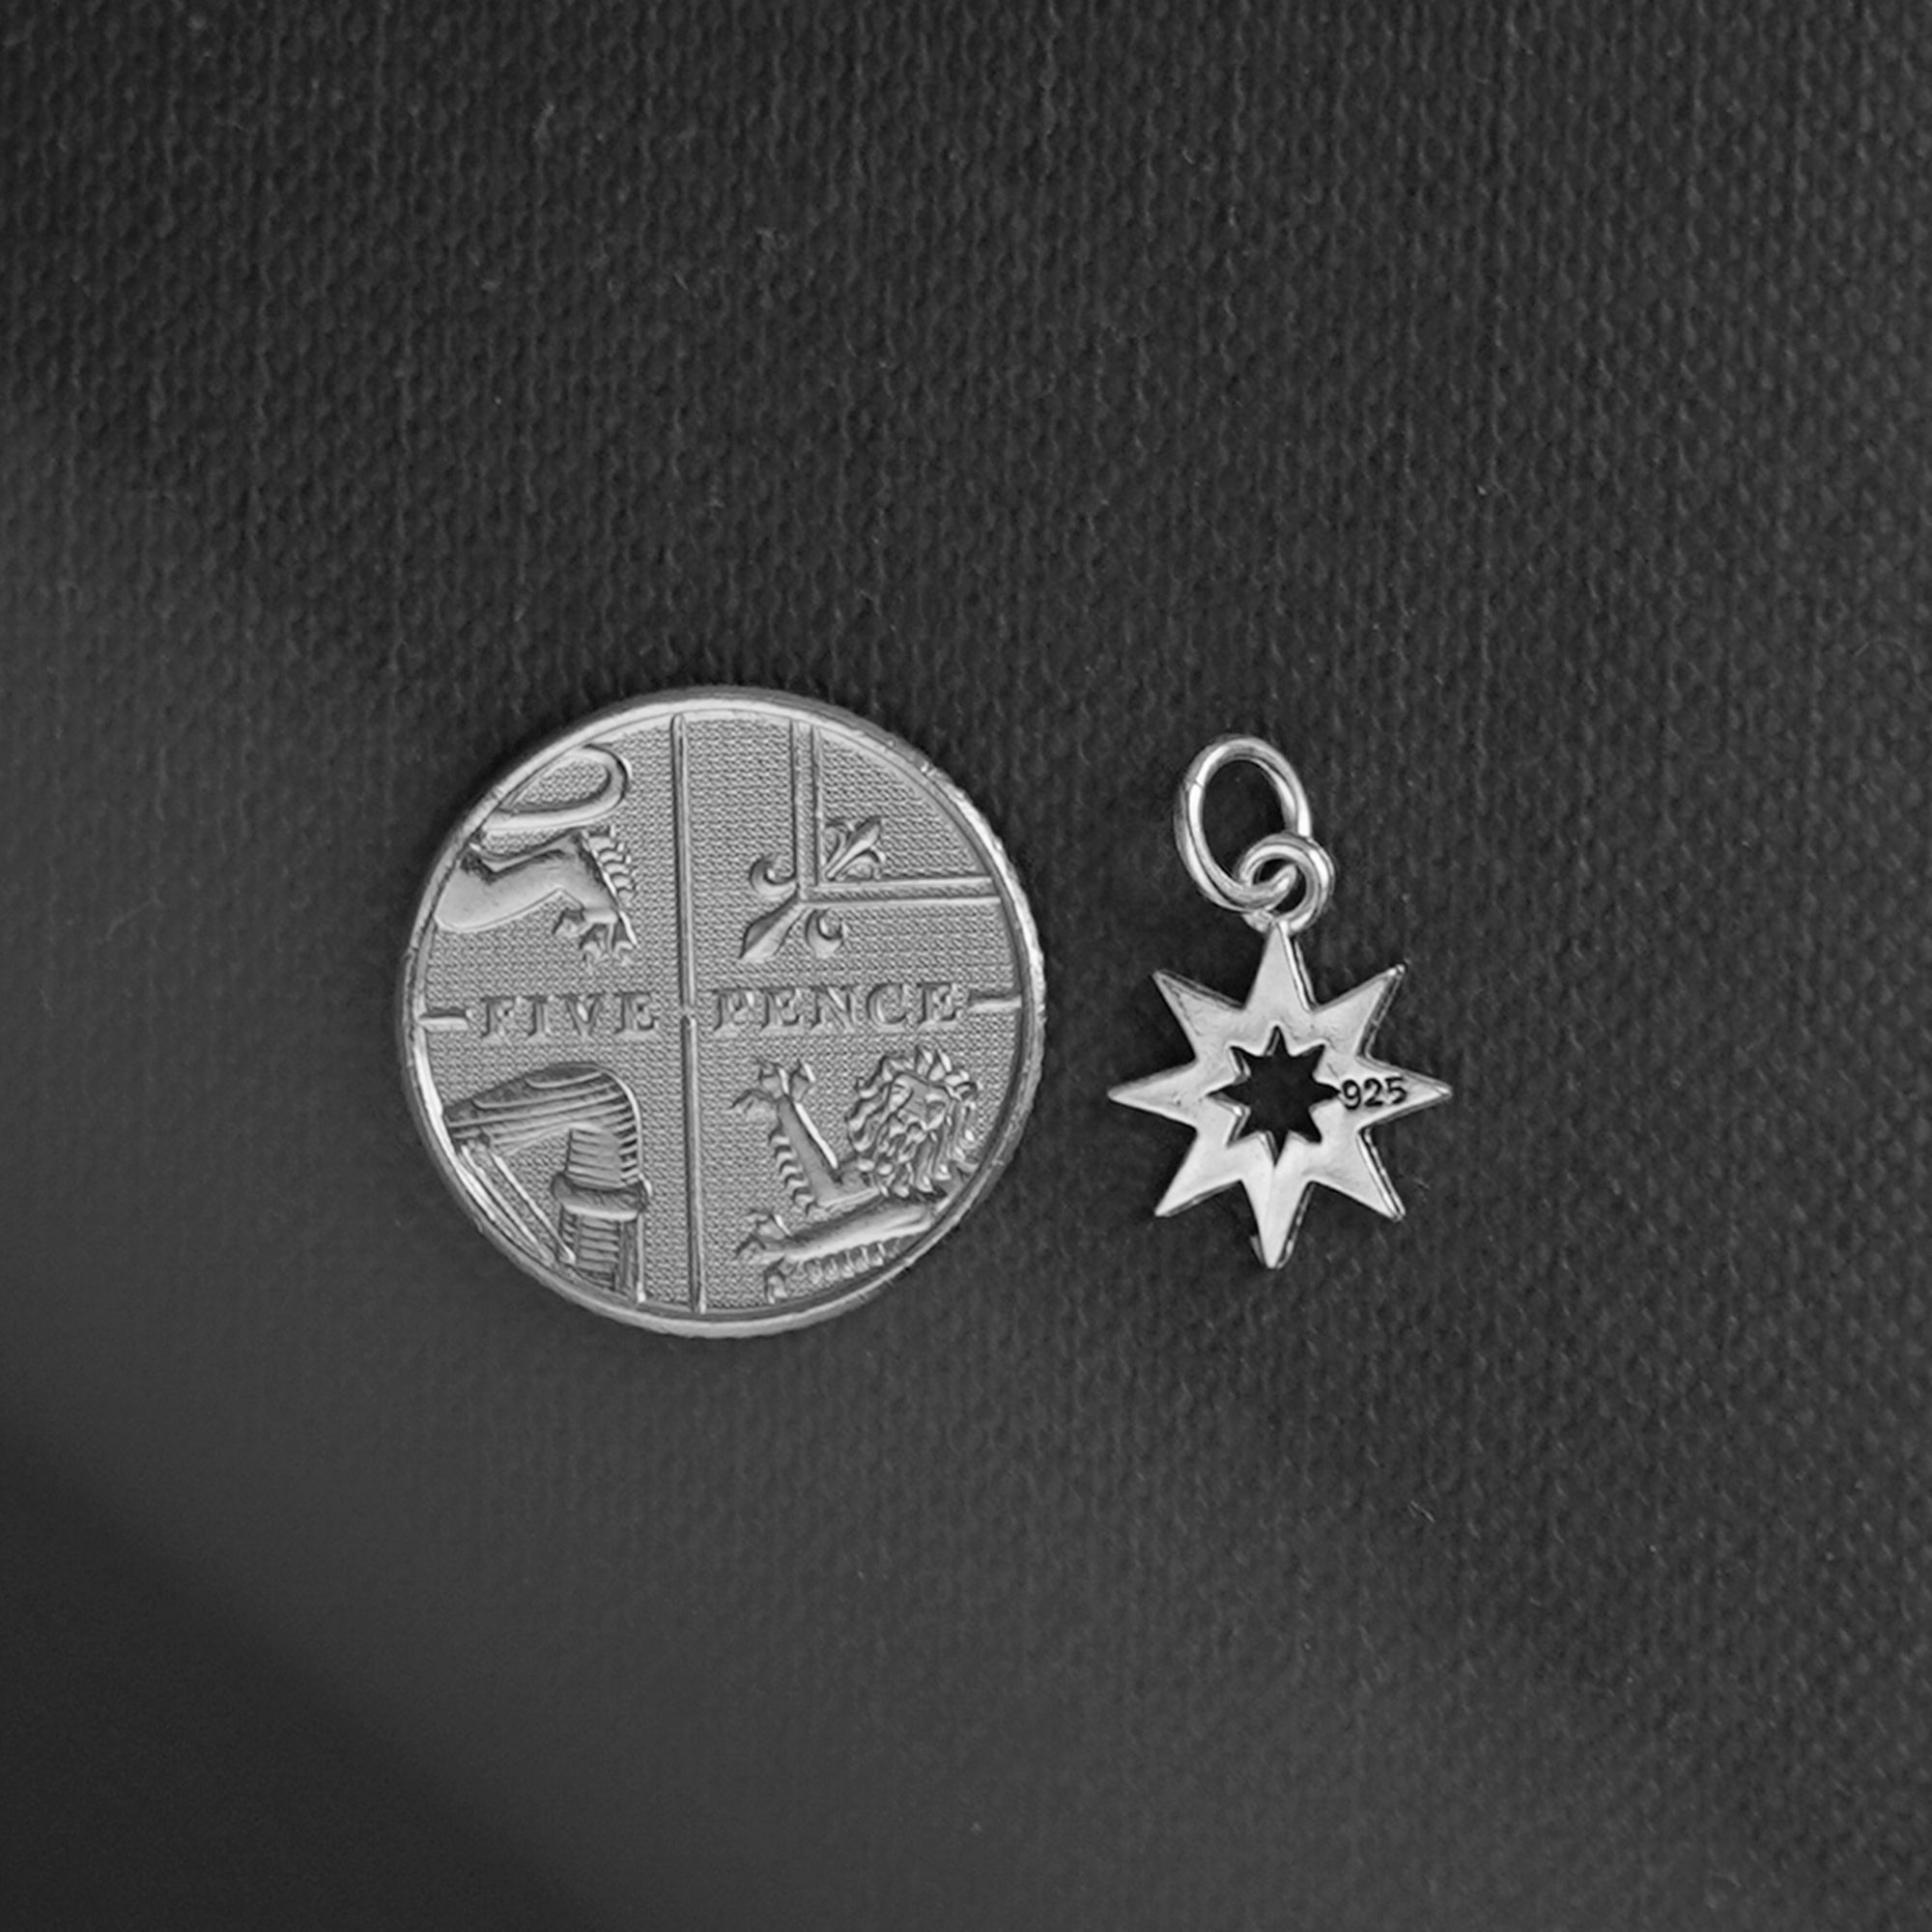 Amazon.com: Erzgamma Lucky Star Necklace 925 Sterling Silver Charm - 12-pointed  Star with Maltese Cross Pendant - Kabbalah Jewelry - Ancient Sacred  Religious Symbol - Strong Protective Amulet for Men Women : Productos  Handmade